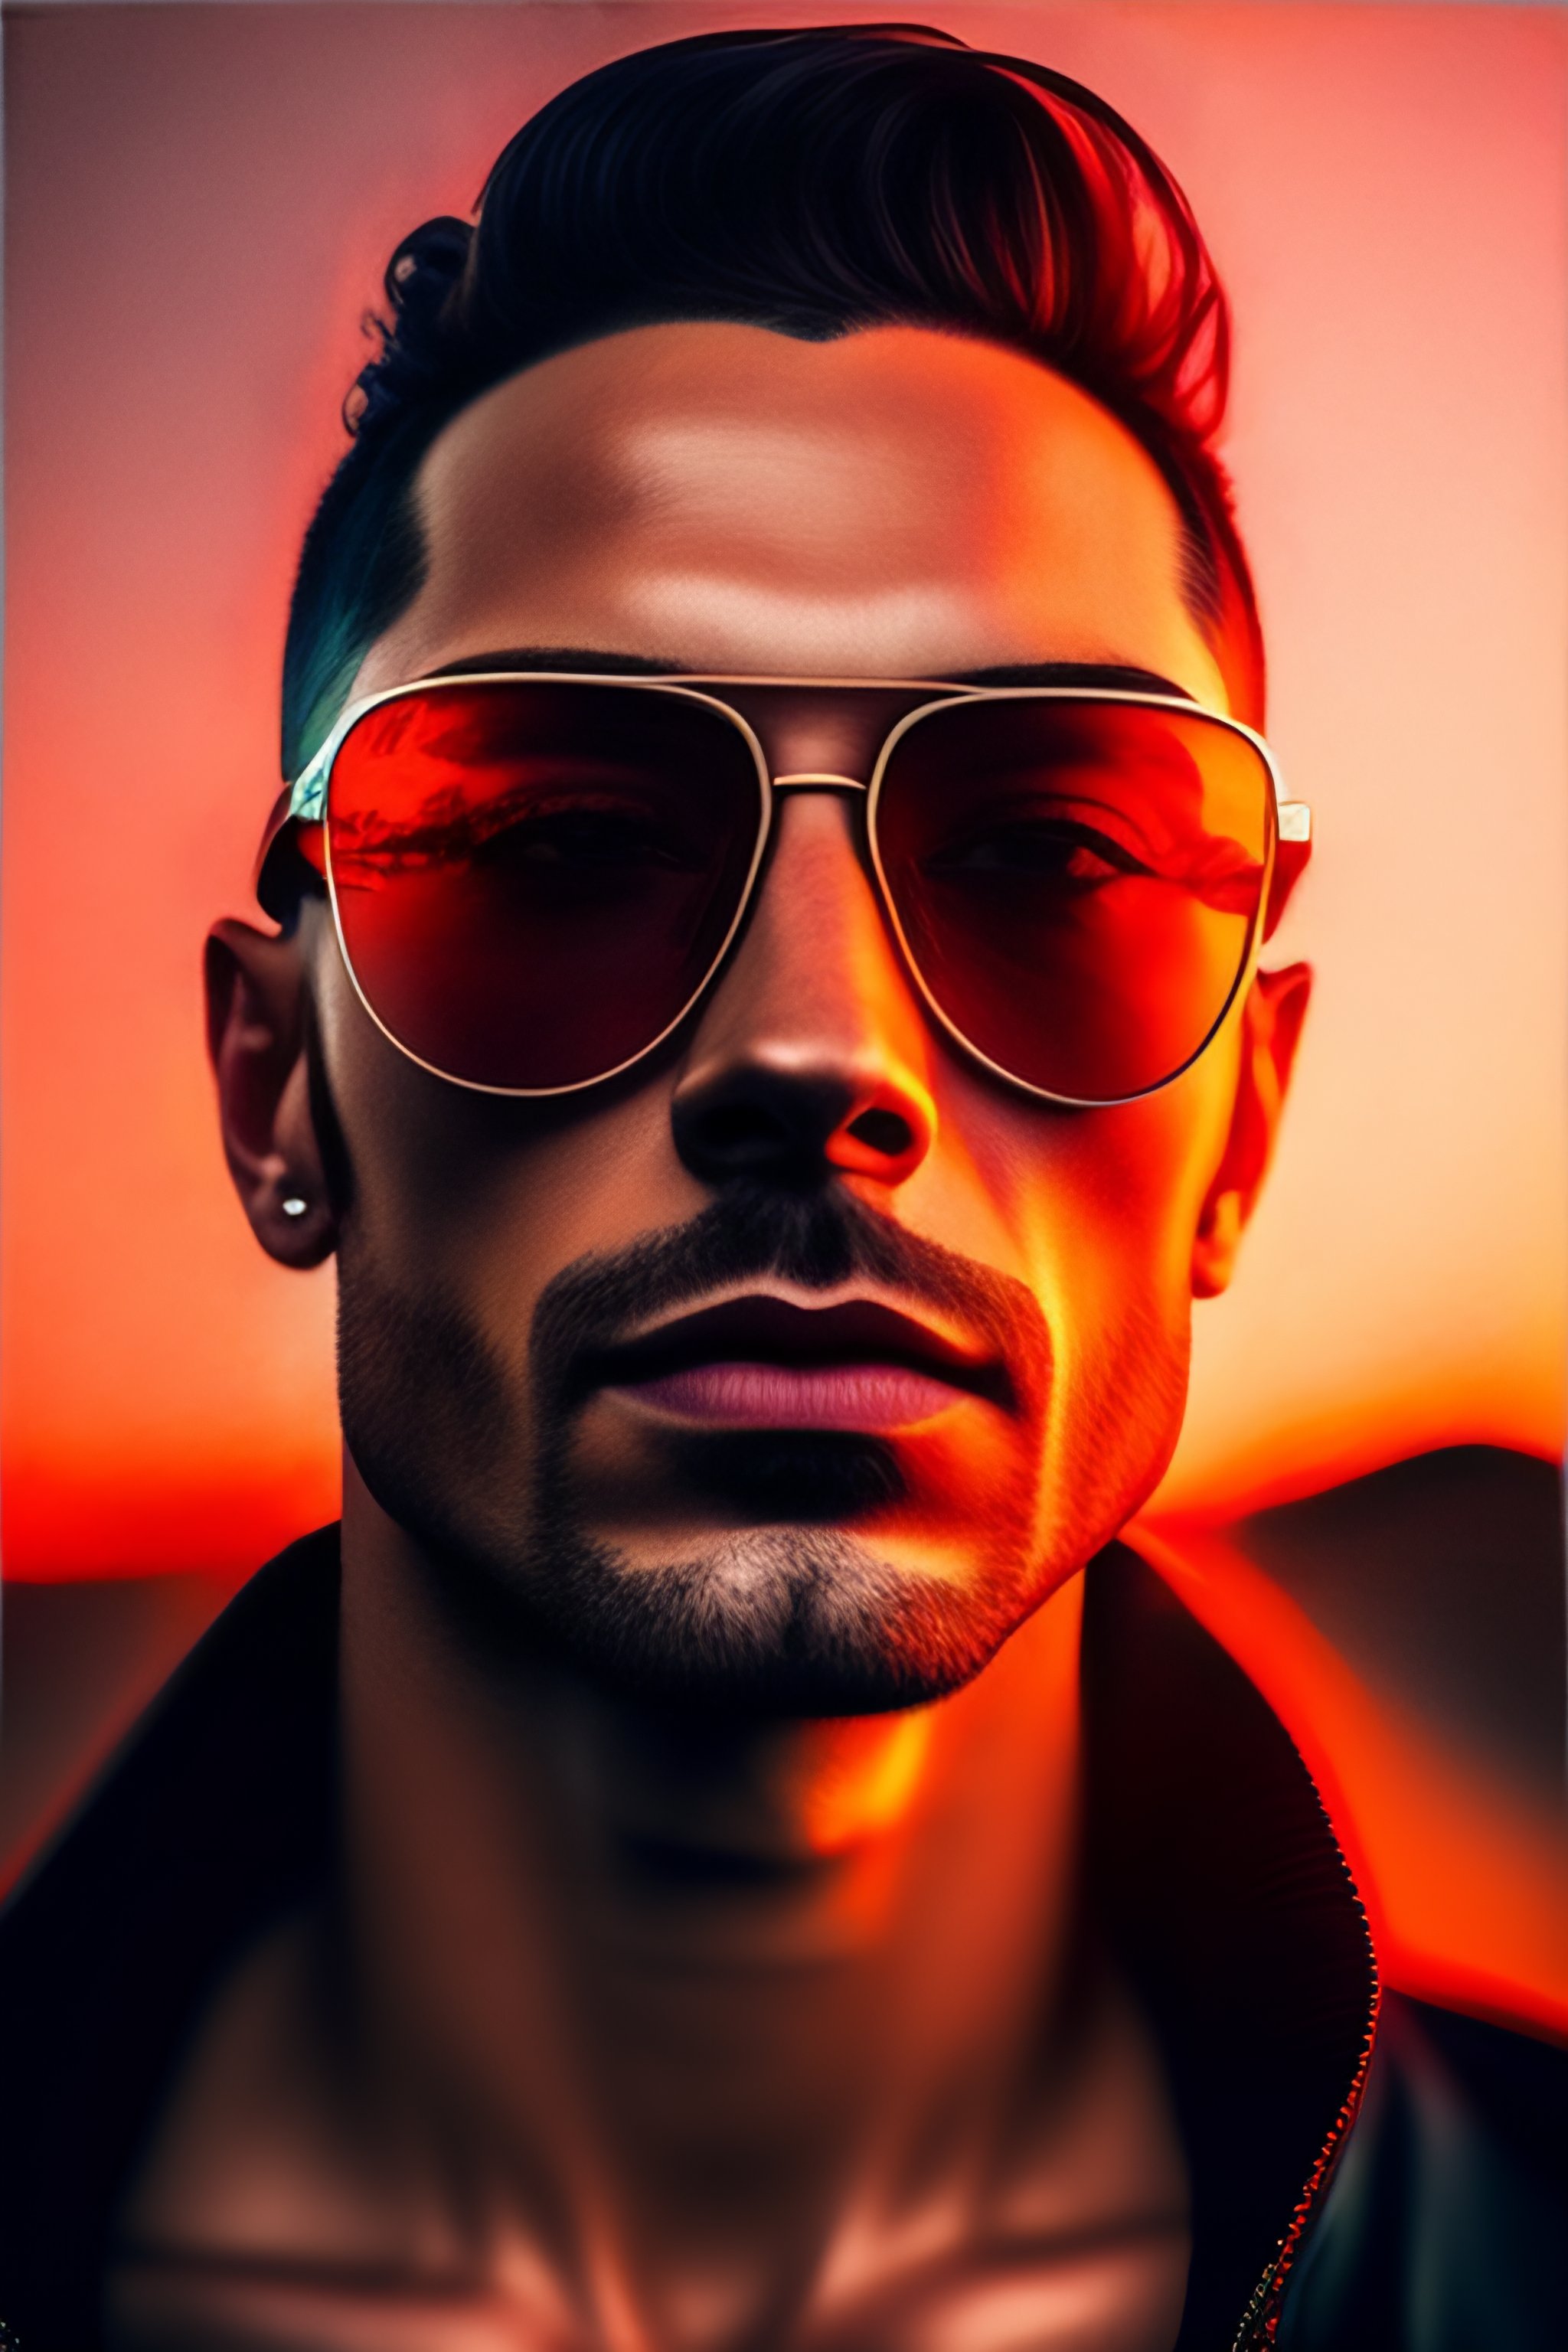 Andrew Tate Sunglasses: What Sunglasses Does Andrew Tate Wear?